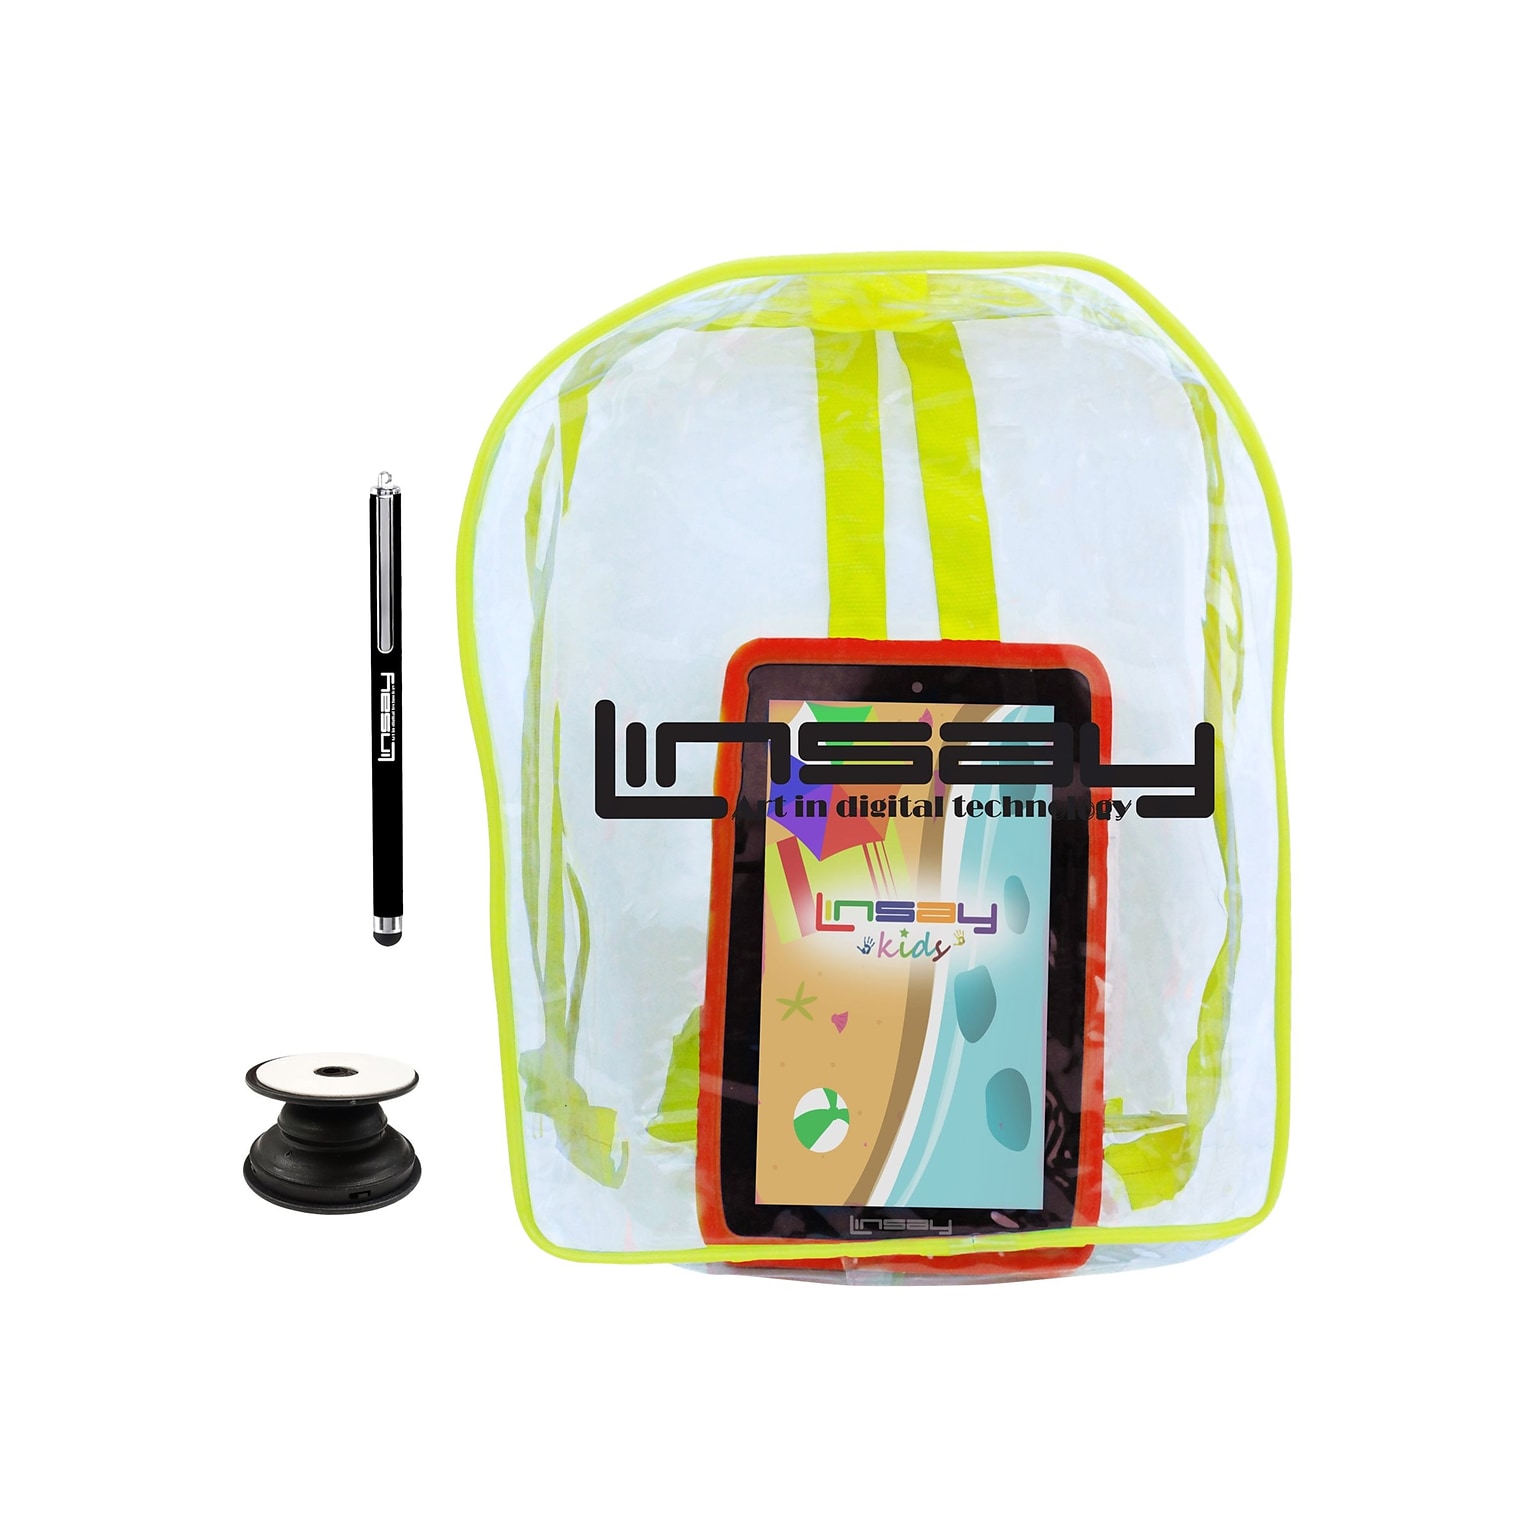 Linsay 7 Tablet with Holder, Pen, Case, and Backpack, WiFi, 2GB RAM, 64GB Storage, Android 13, Black/Red (F7UHDKIDSBAGRP)